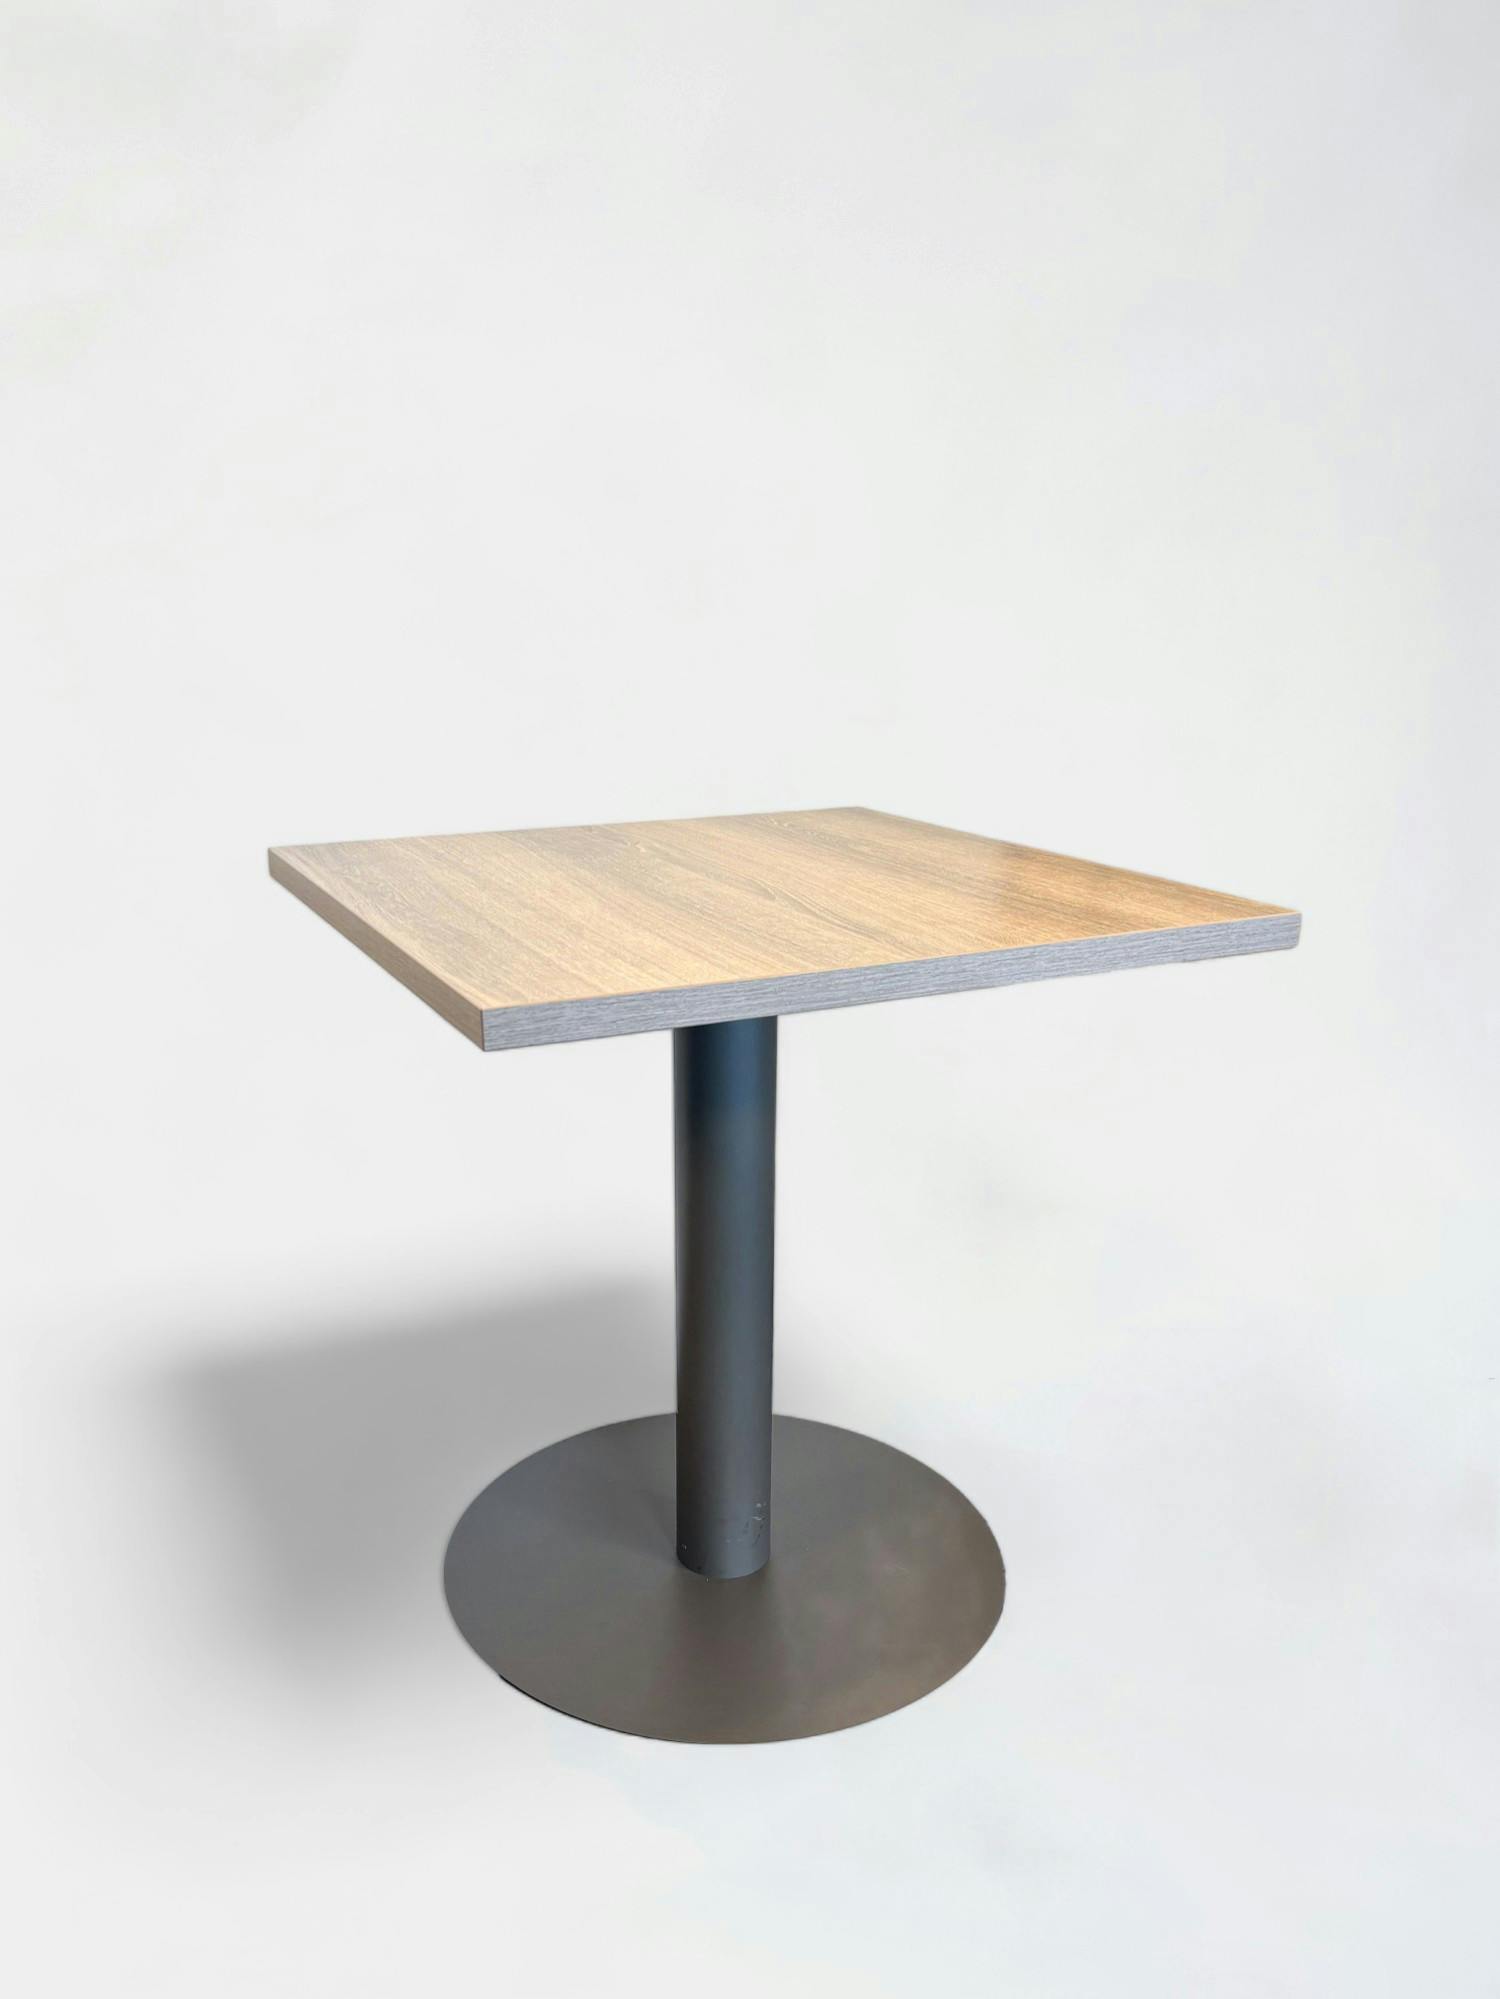 Grey Wood Effect Ergonomic table with Sturdy Circular Base - Relieve Furniture